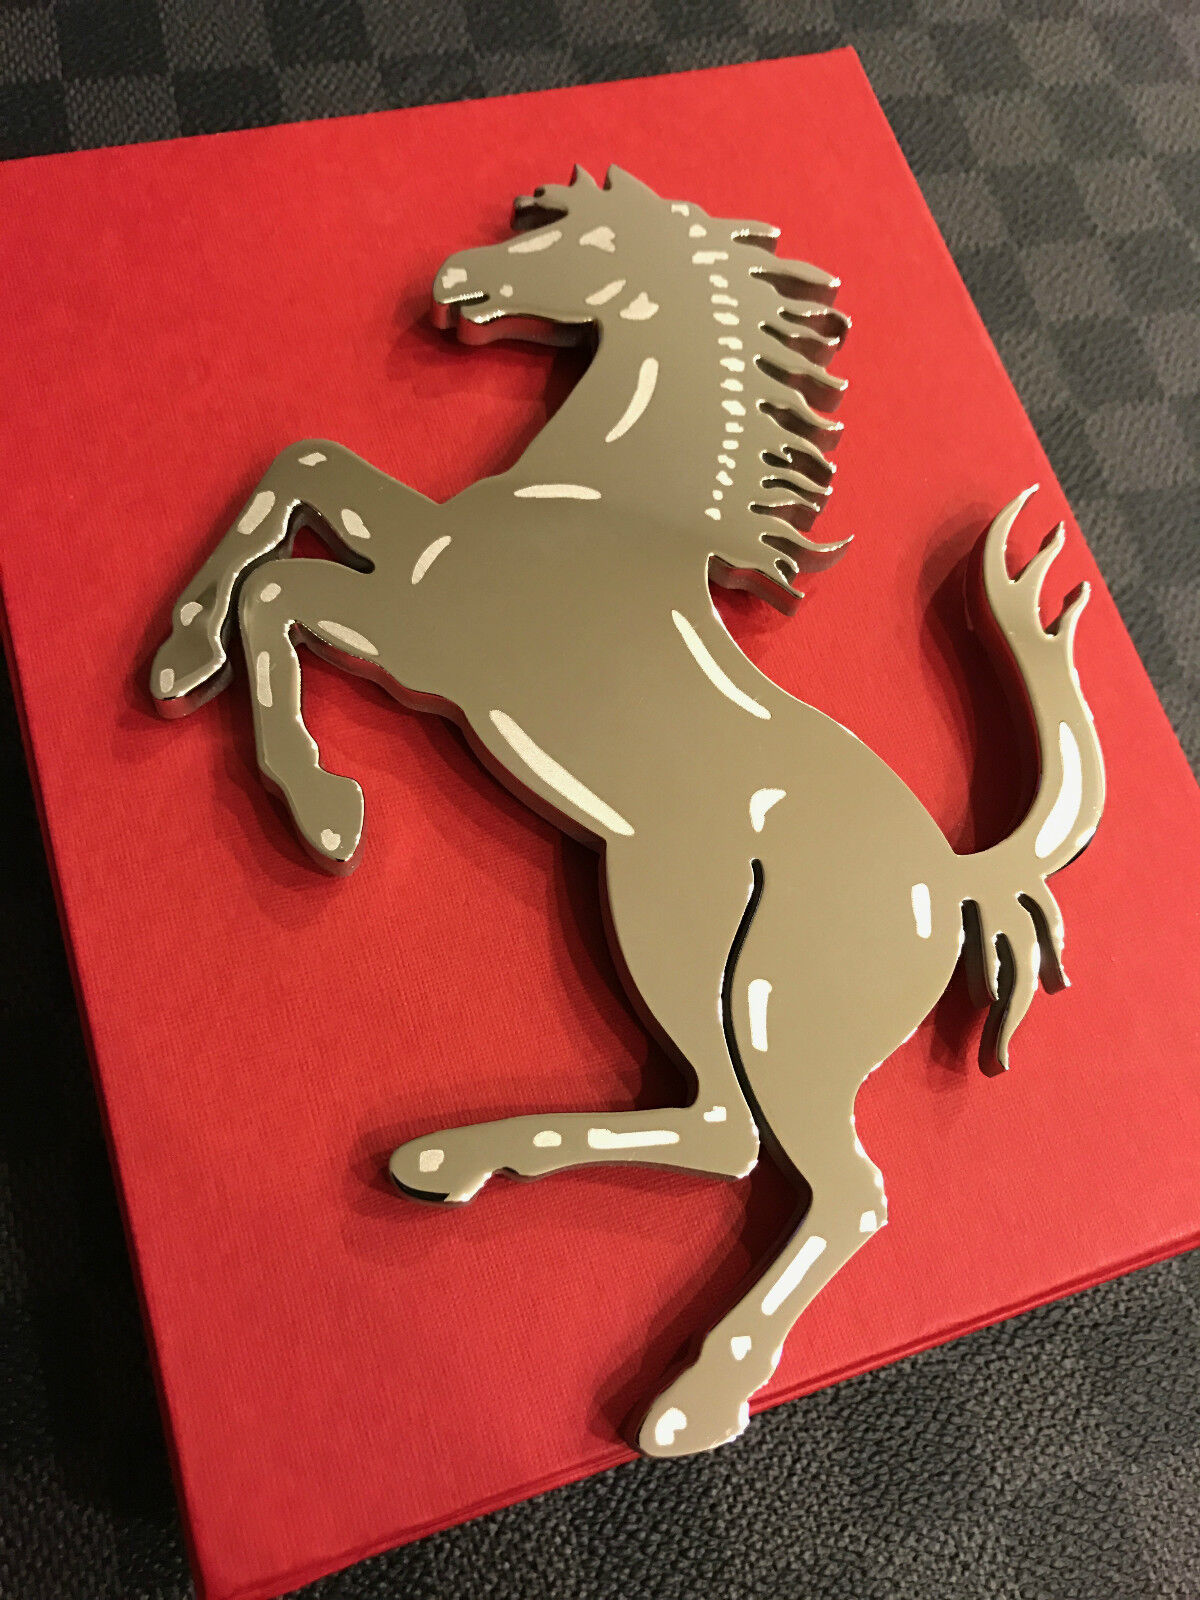 Genuine Ferrari Prancing Horse Paperweight 270003042 Extremely RARE New in BOX 